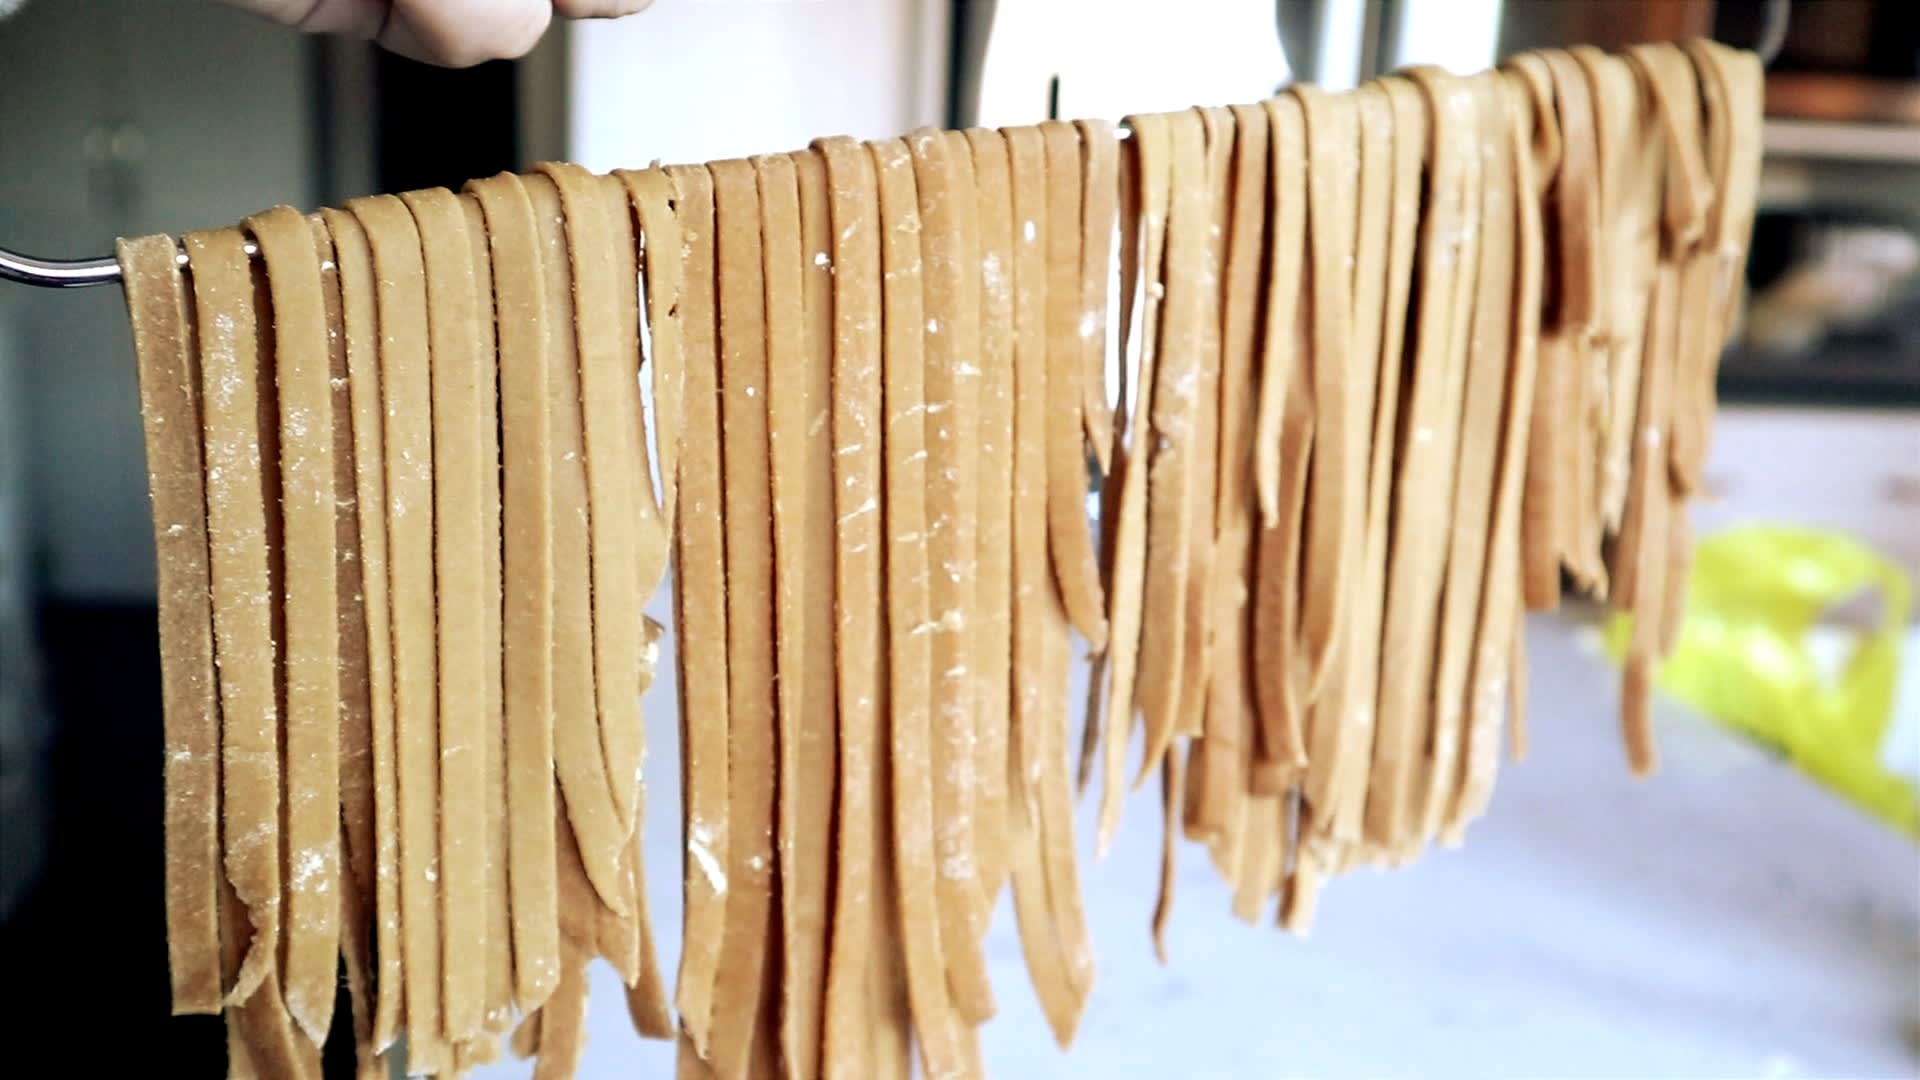 How to Dry Homemade Pasta